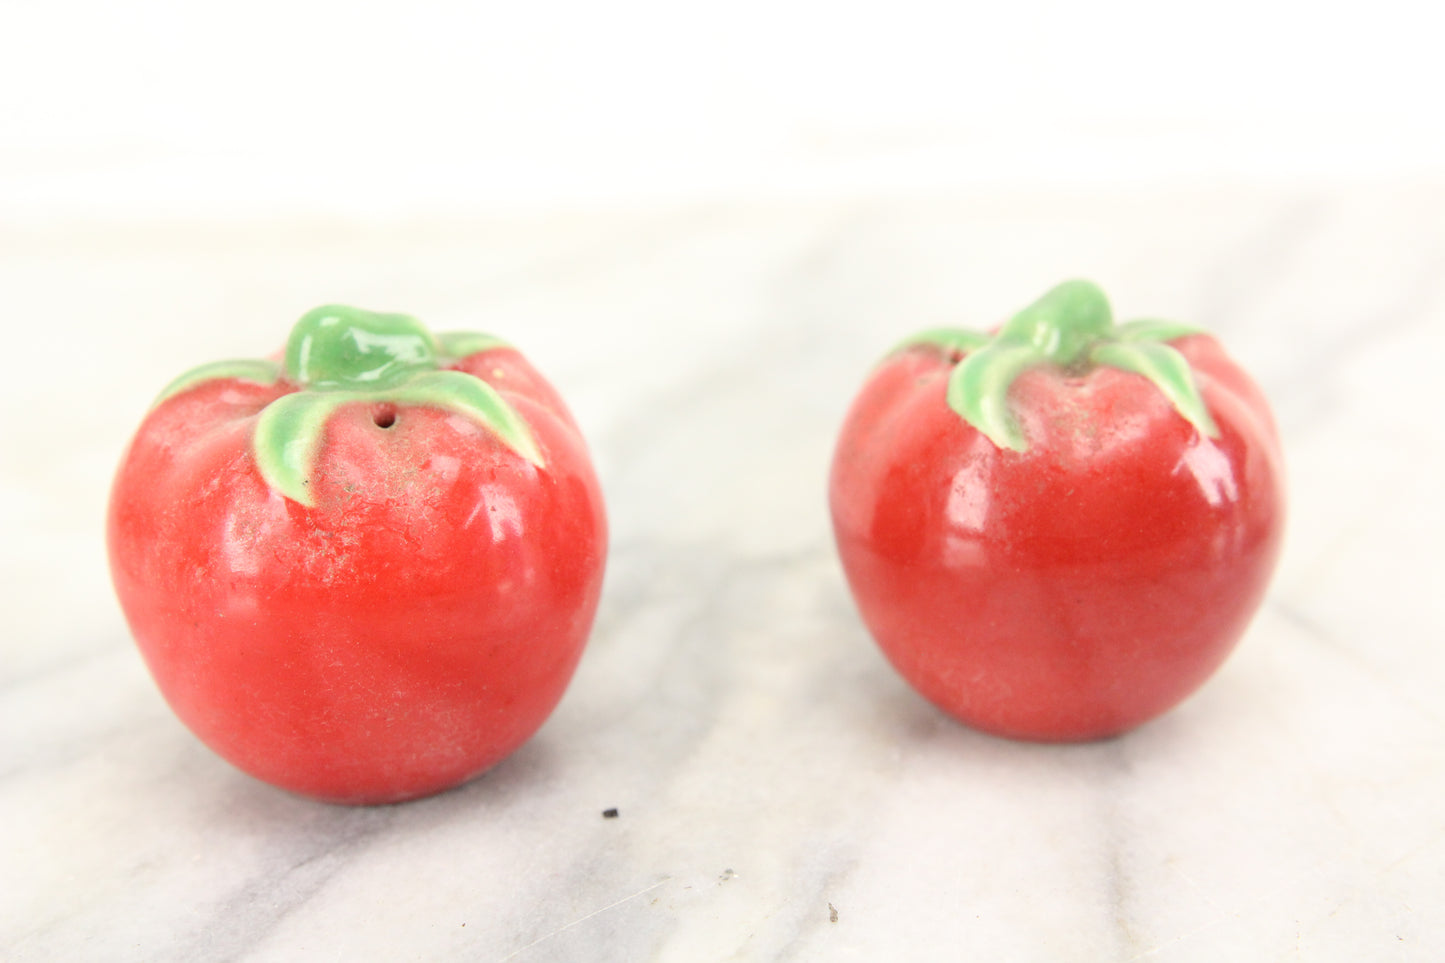 Tomatoes Porcelain Salt and Pepper Shakers